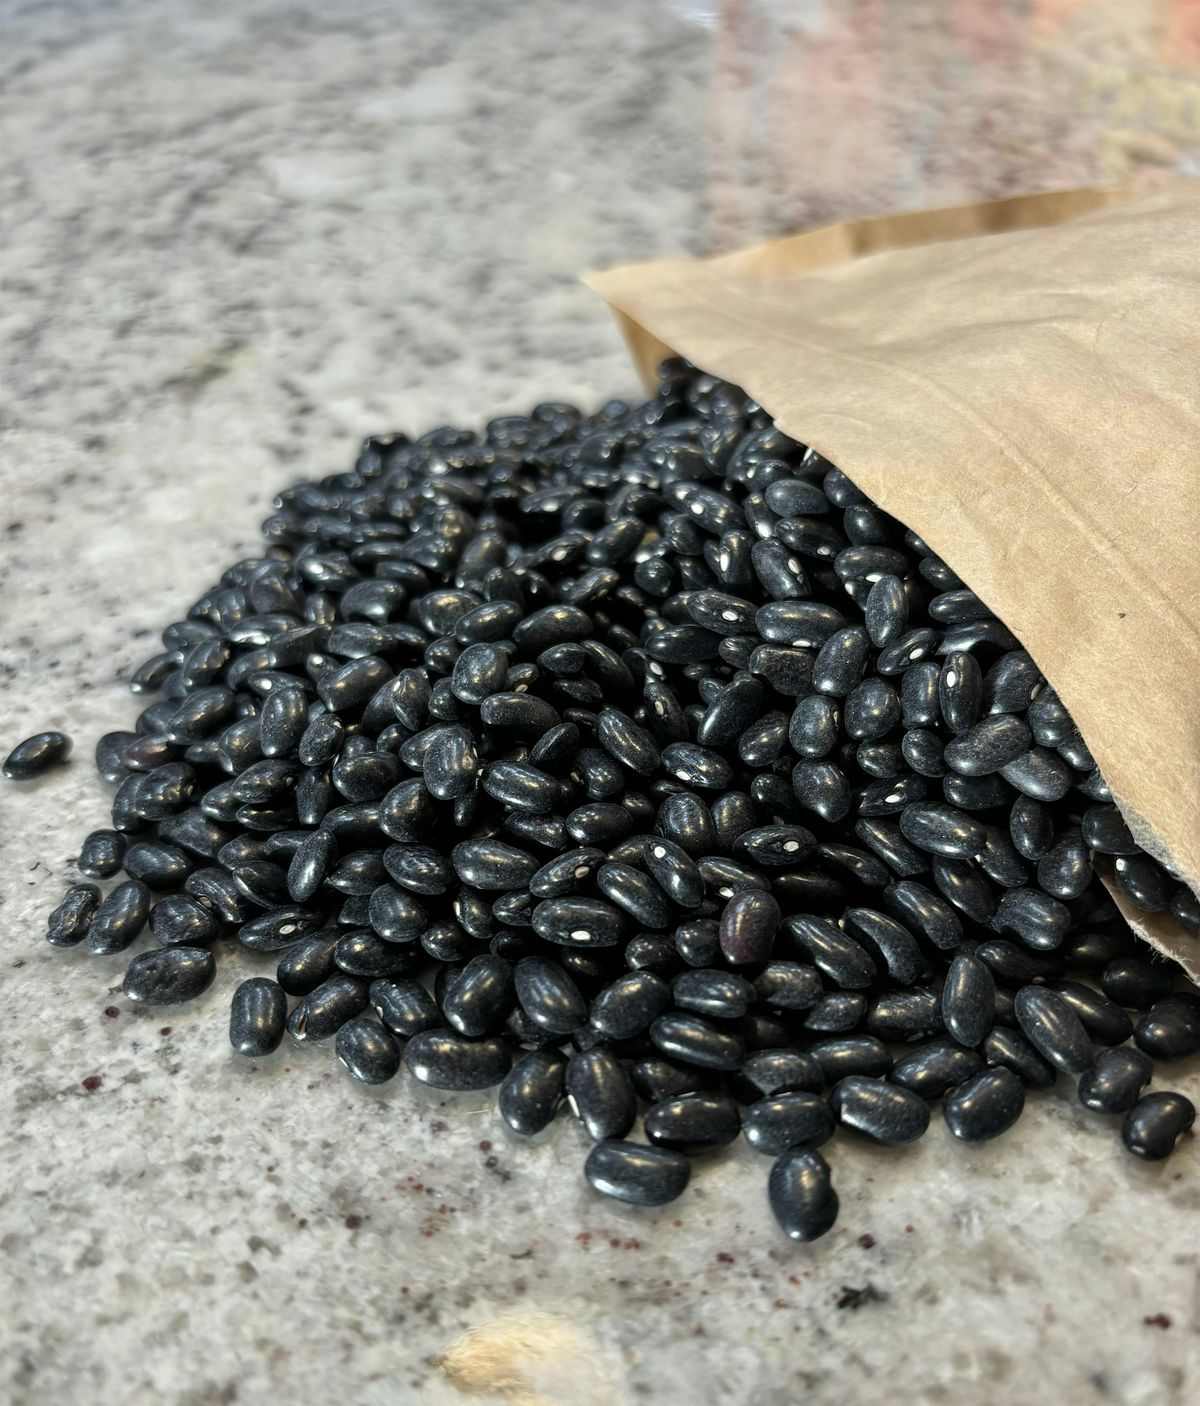 A thousand shades of Black Beans